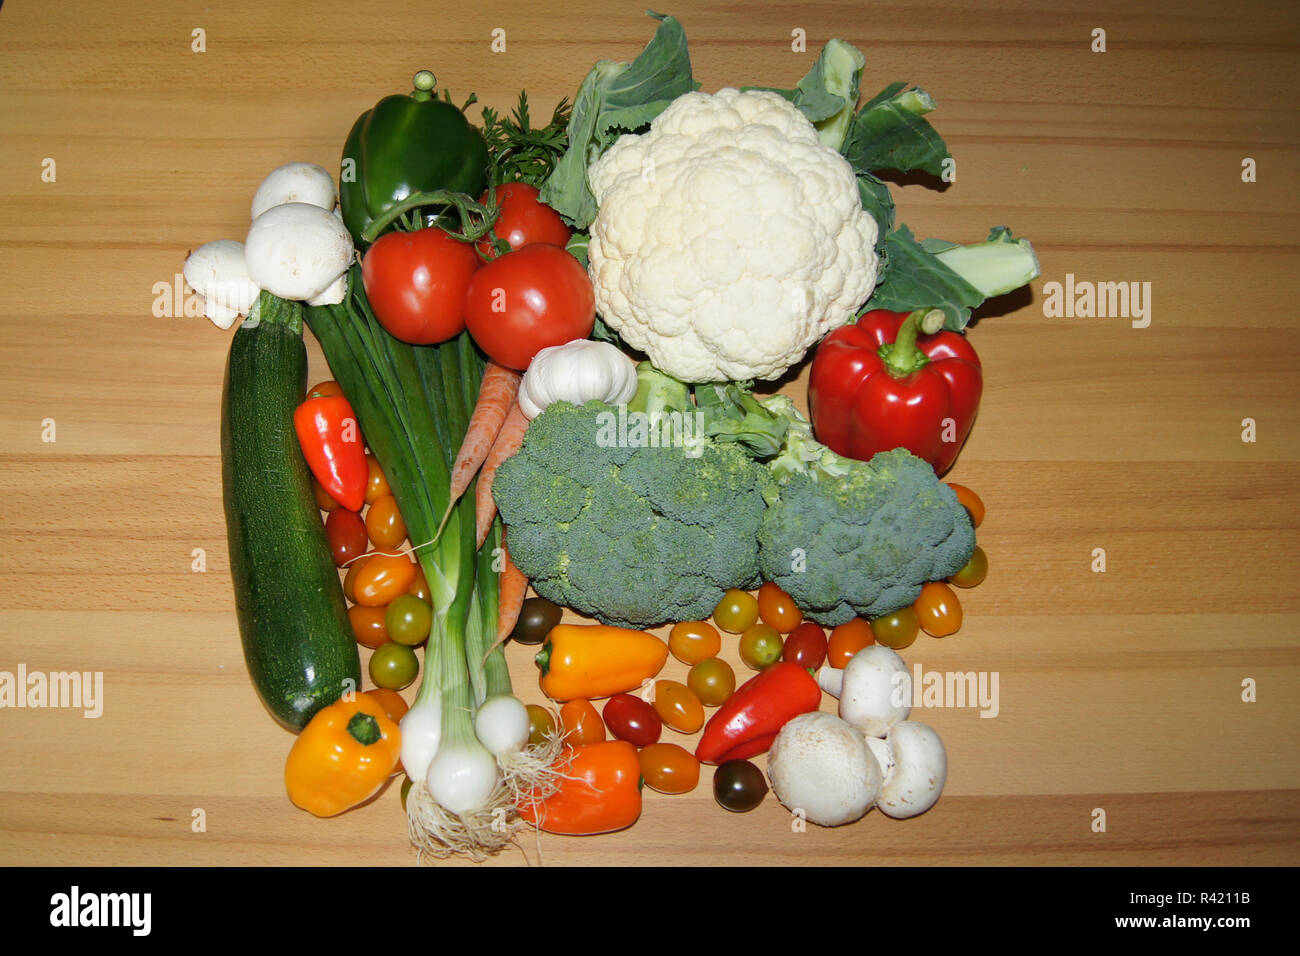 vegetables,shopping for healthy eating on the weekend Stock Photo